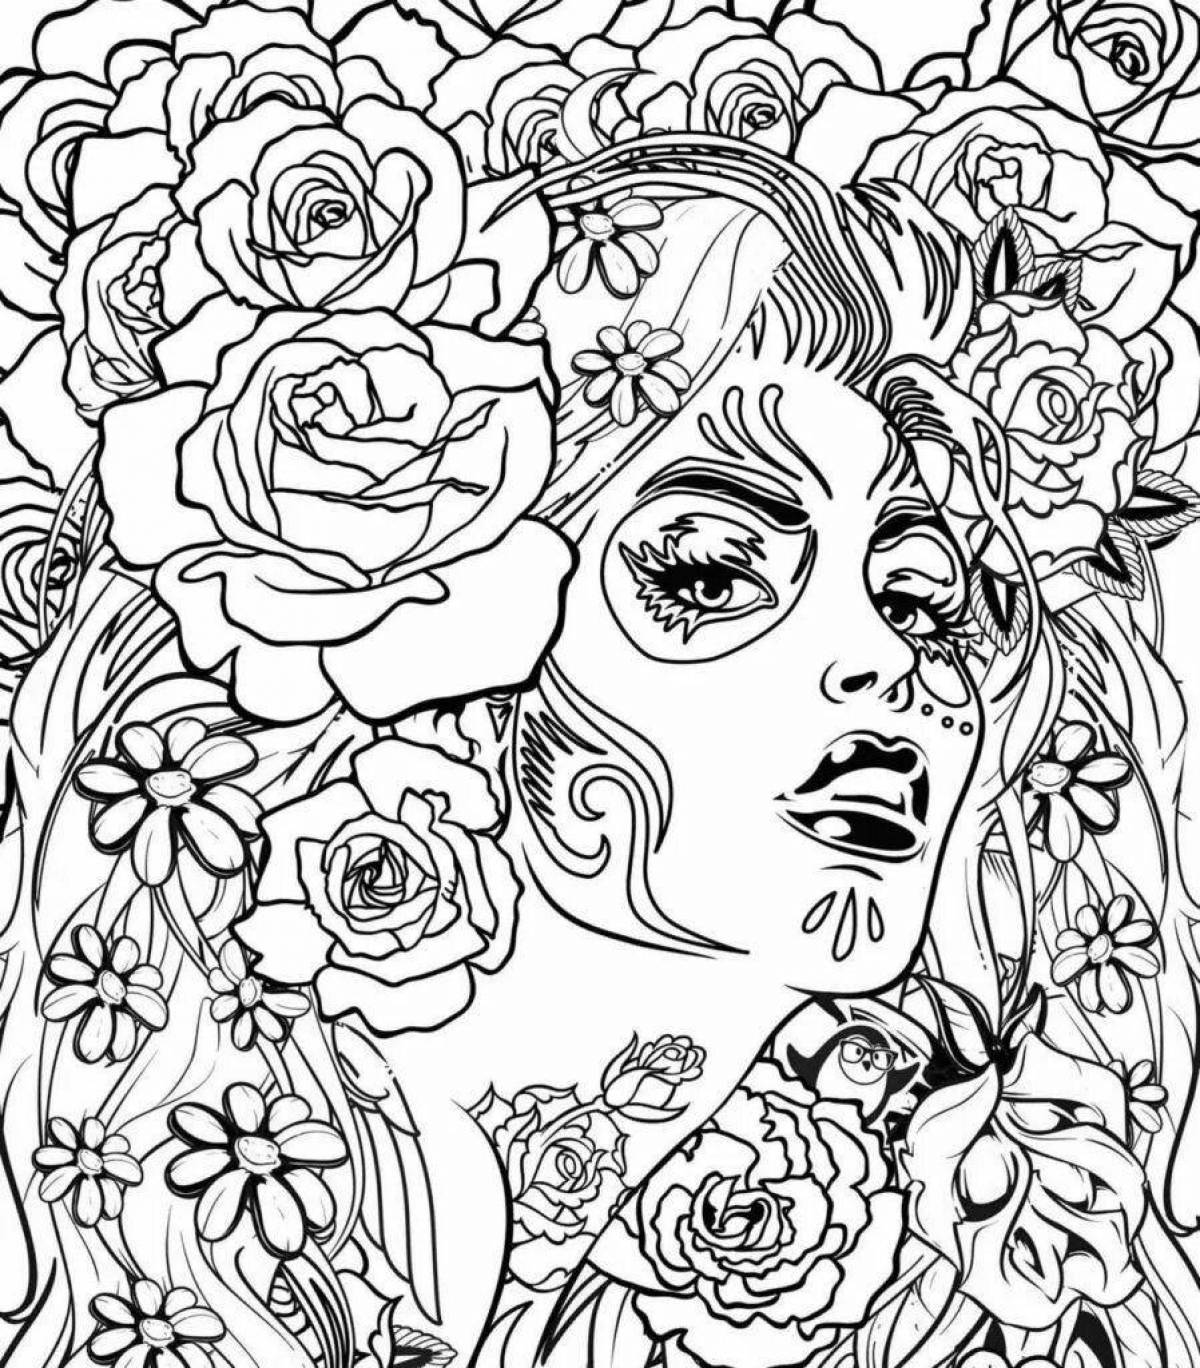 Blissful adult coloring page